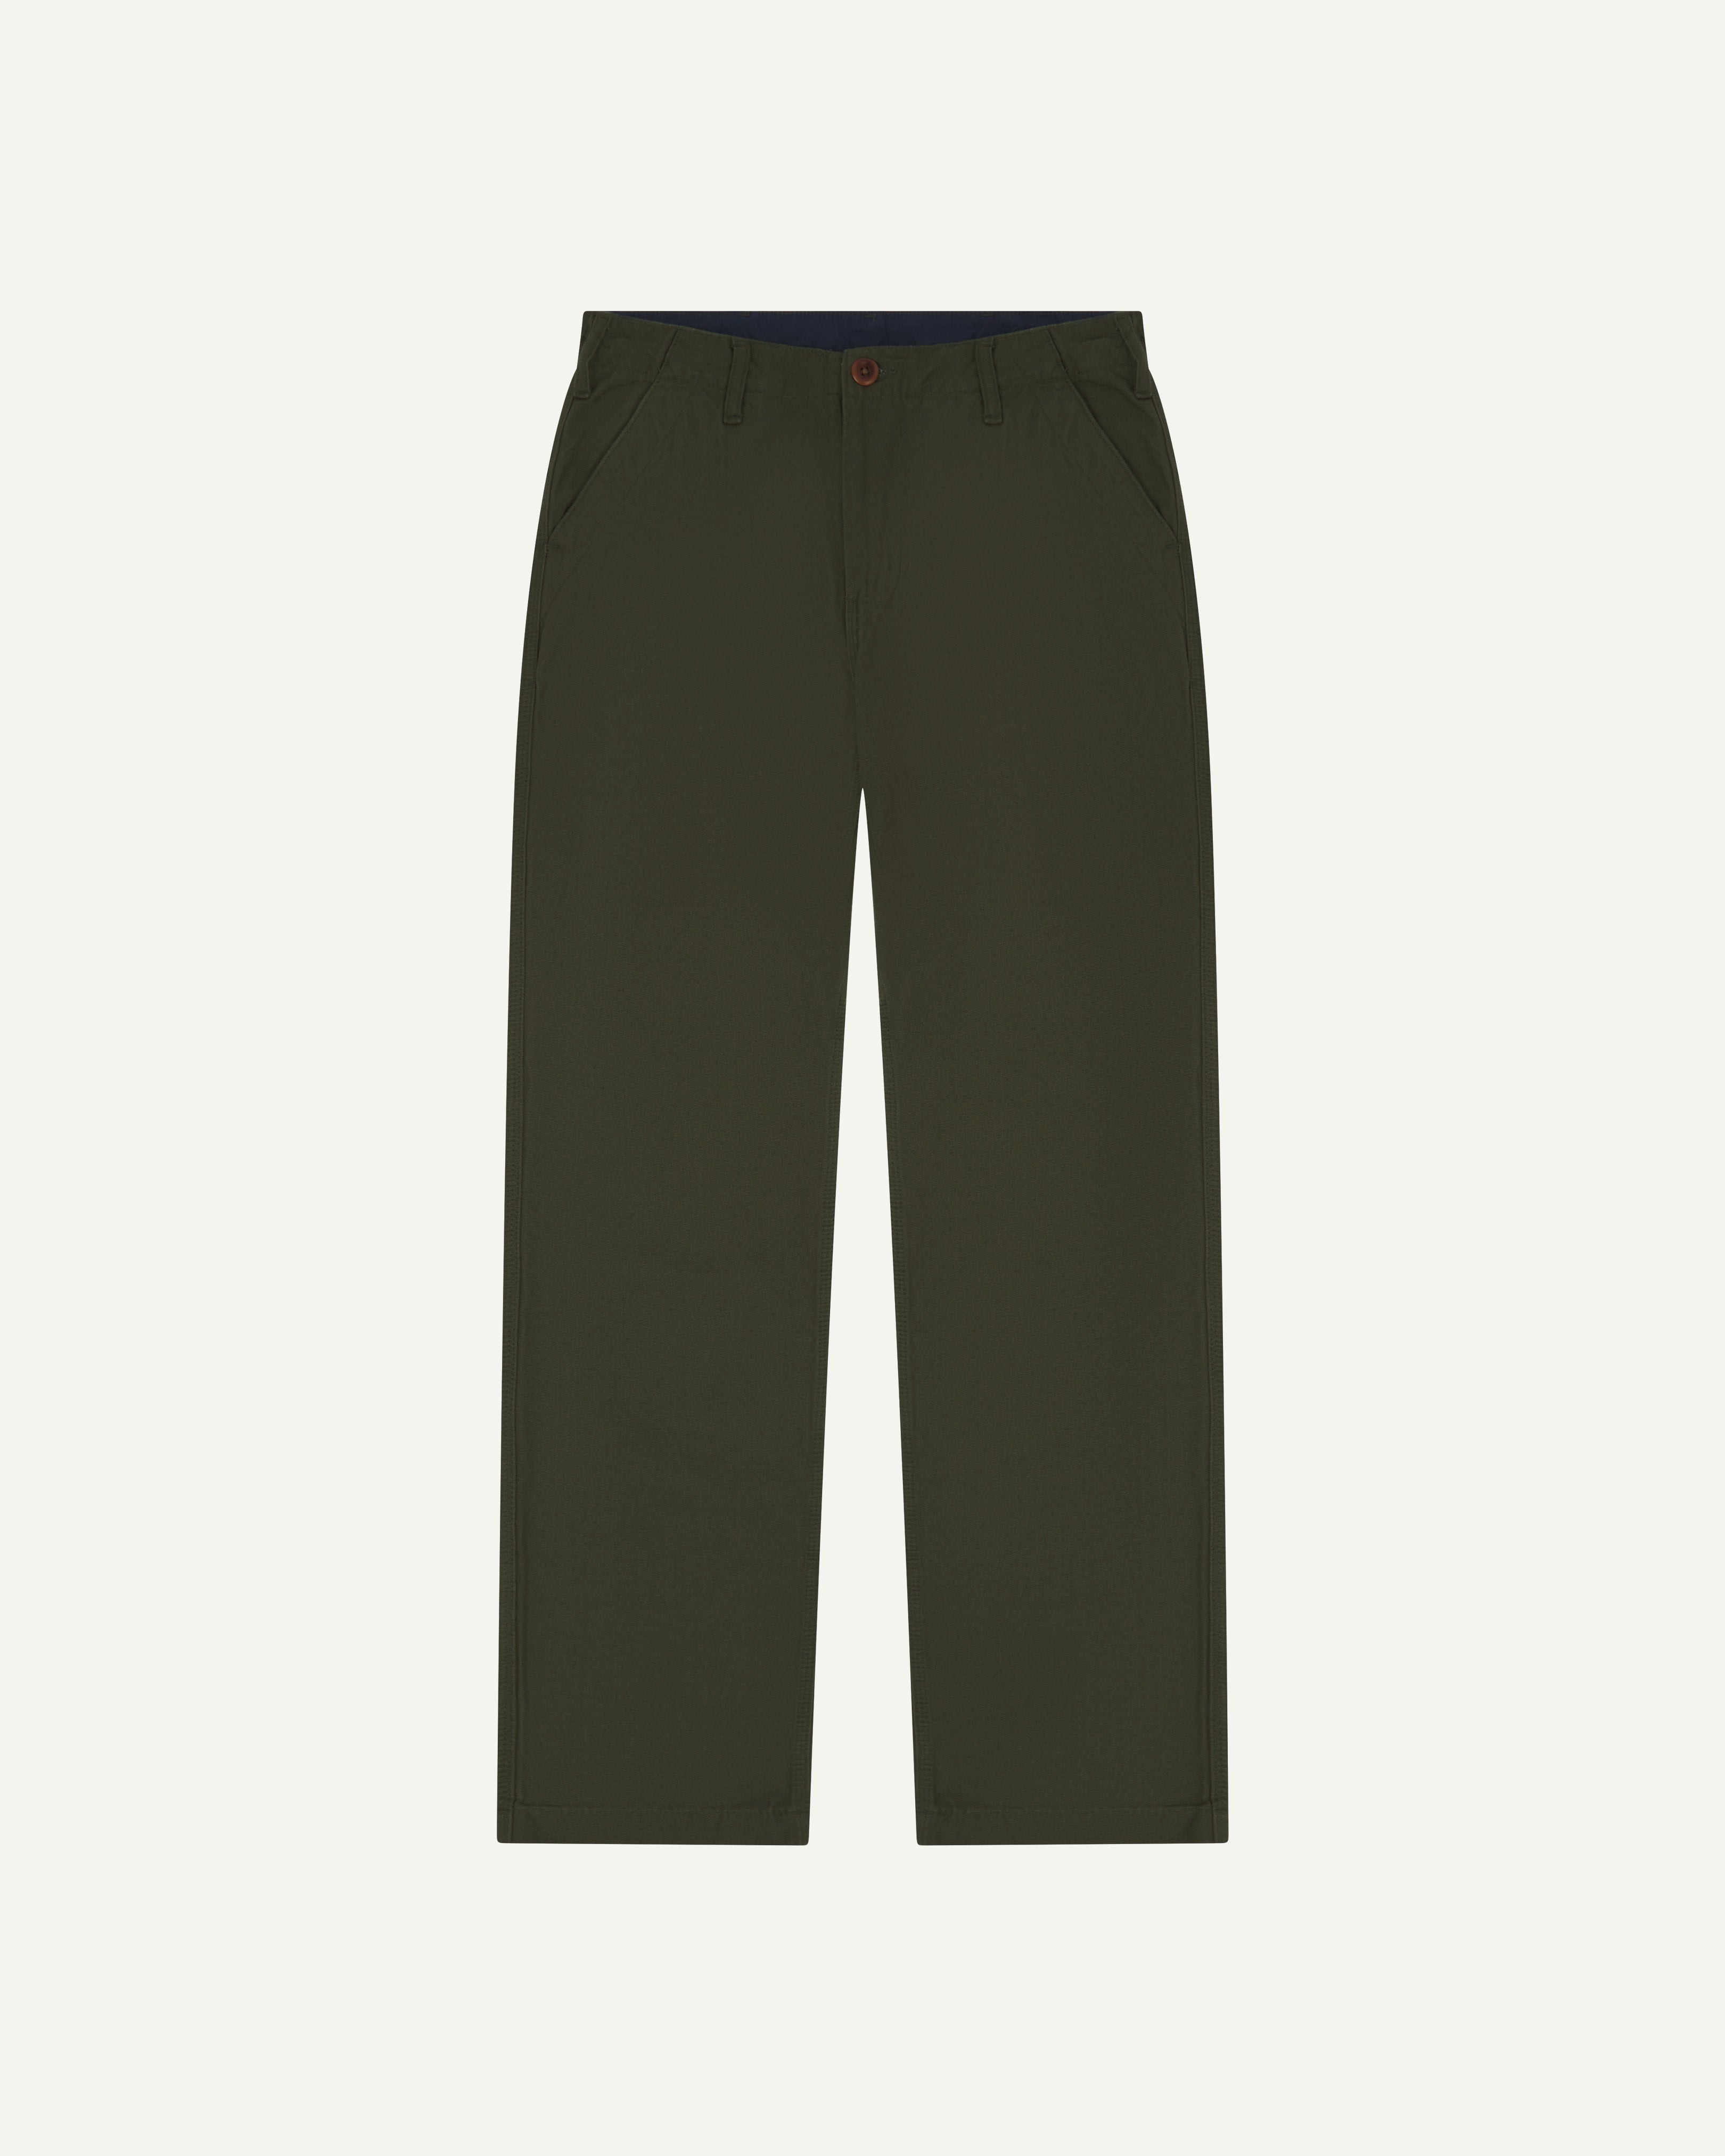 Flat shot of front of #5005 Uskees men's organic cotton vine green workwear trousers with view of brown corozo button and belt loops